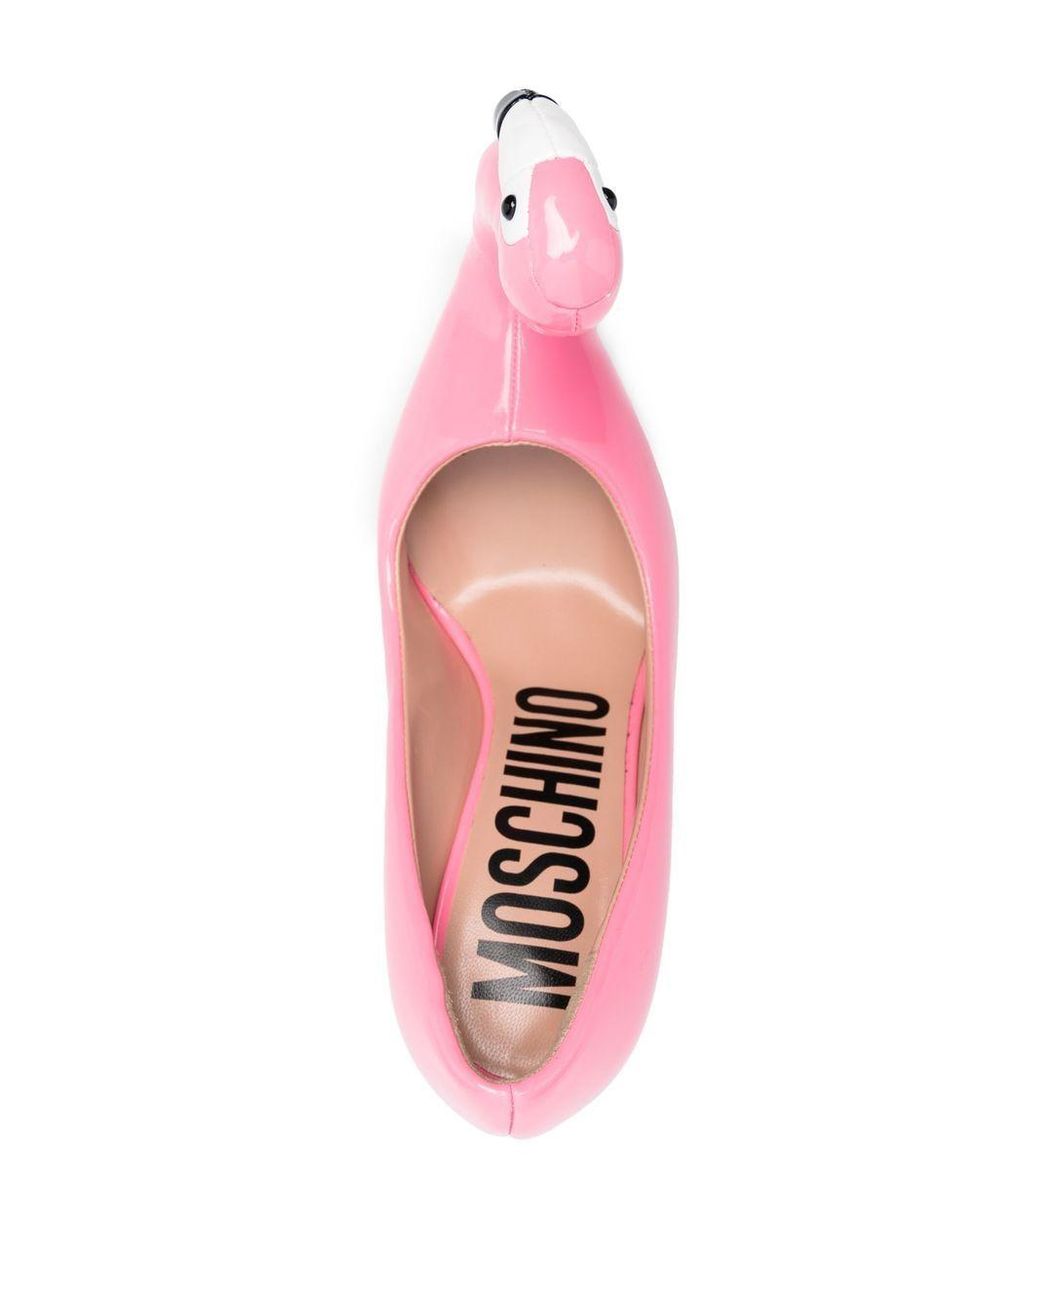 Moschino Flamingo-detail 100mm Pumps in Pink